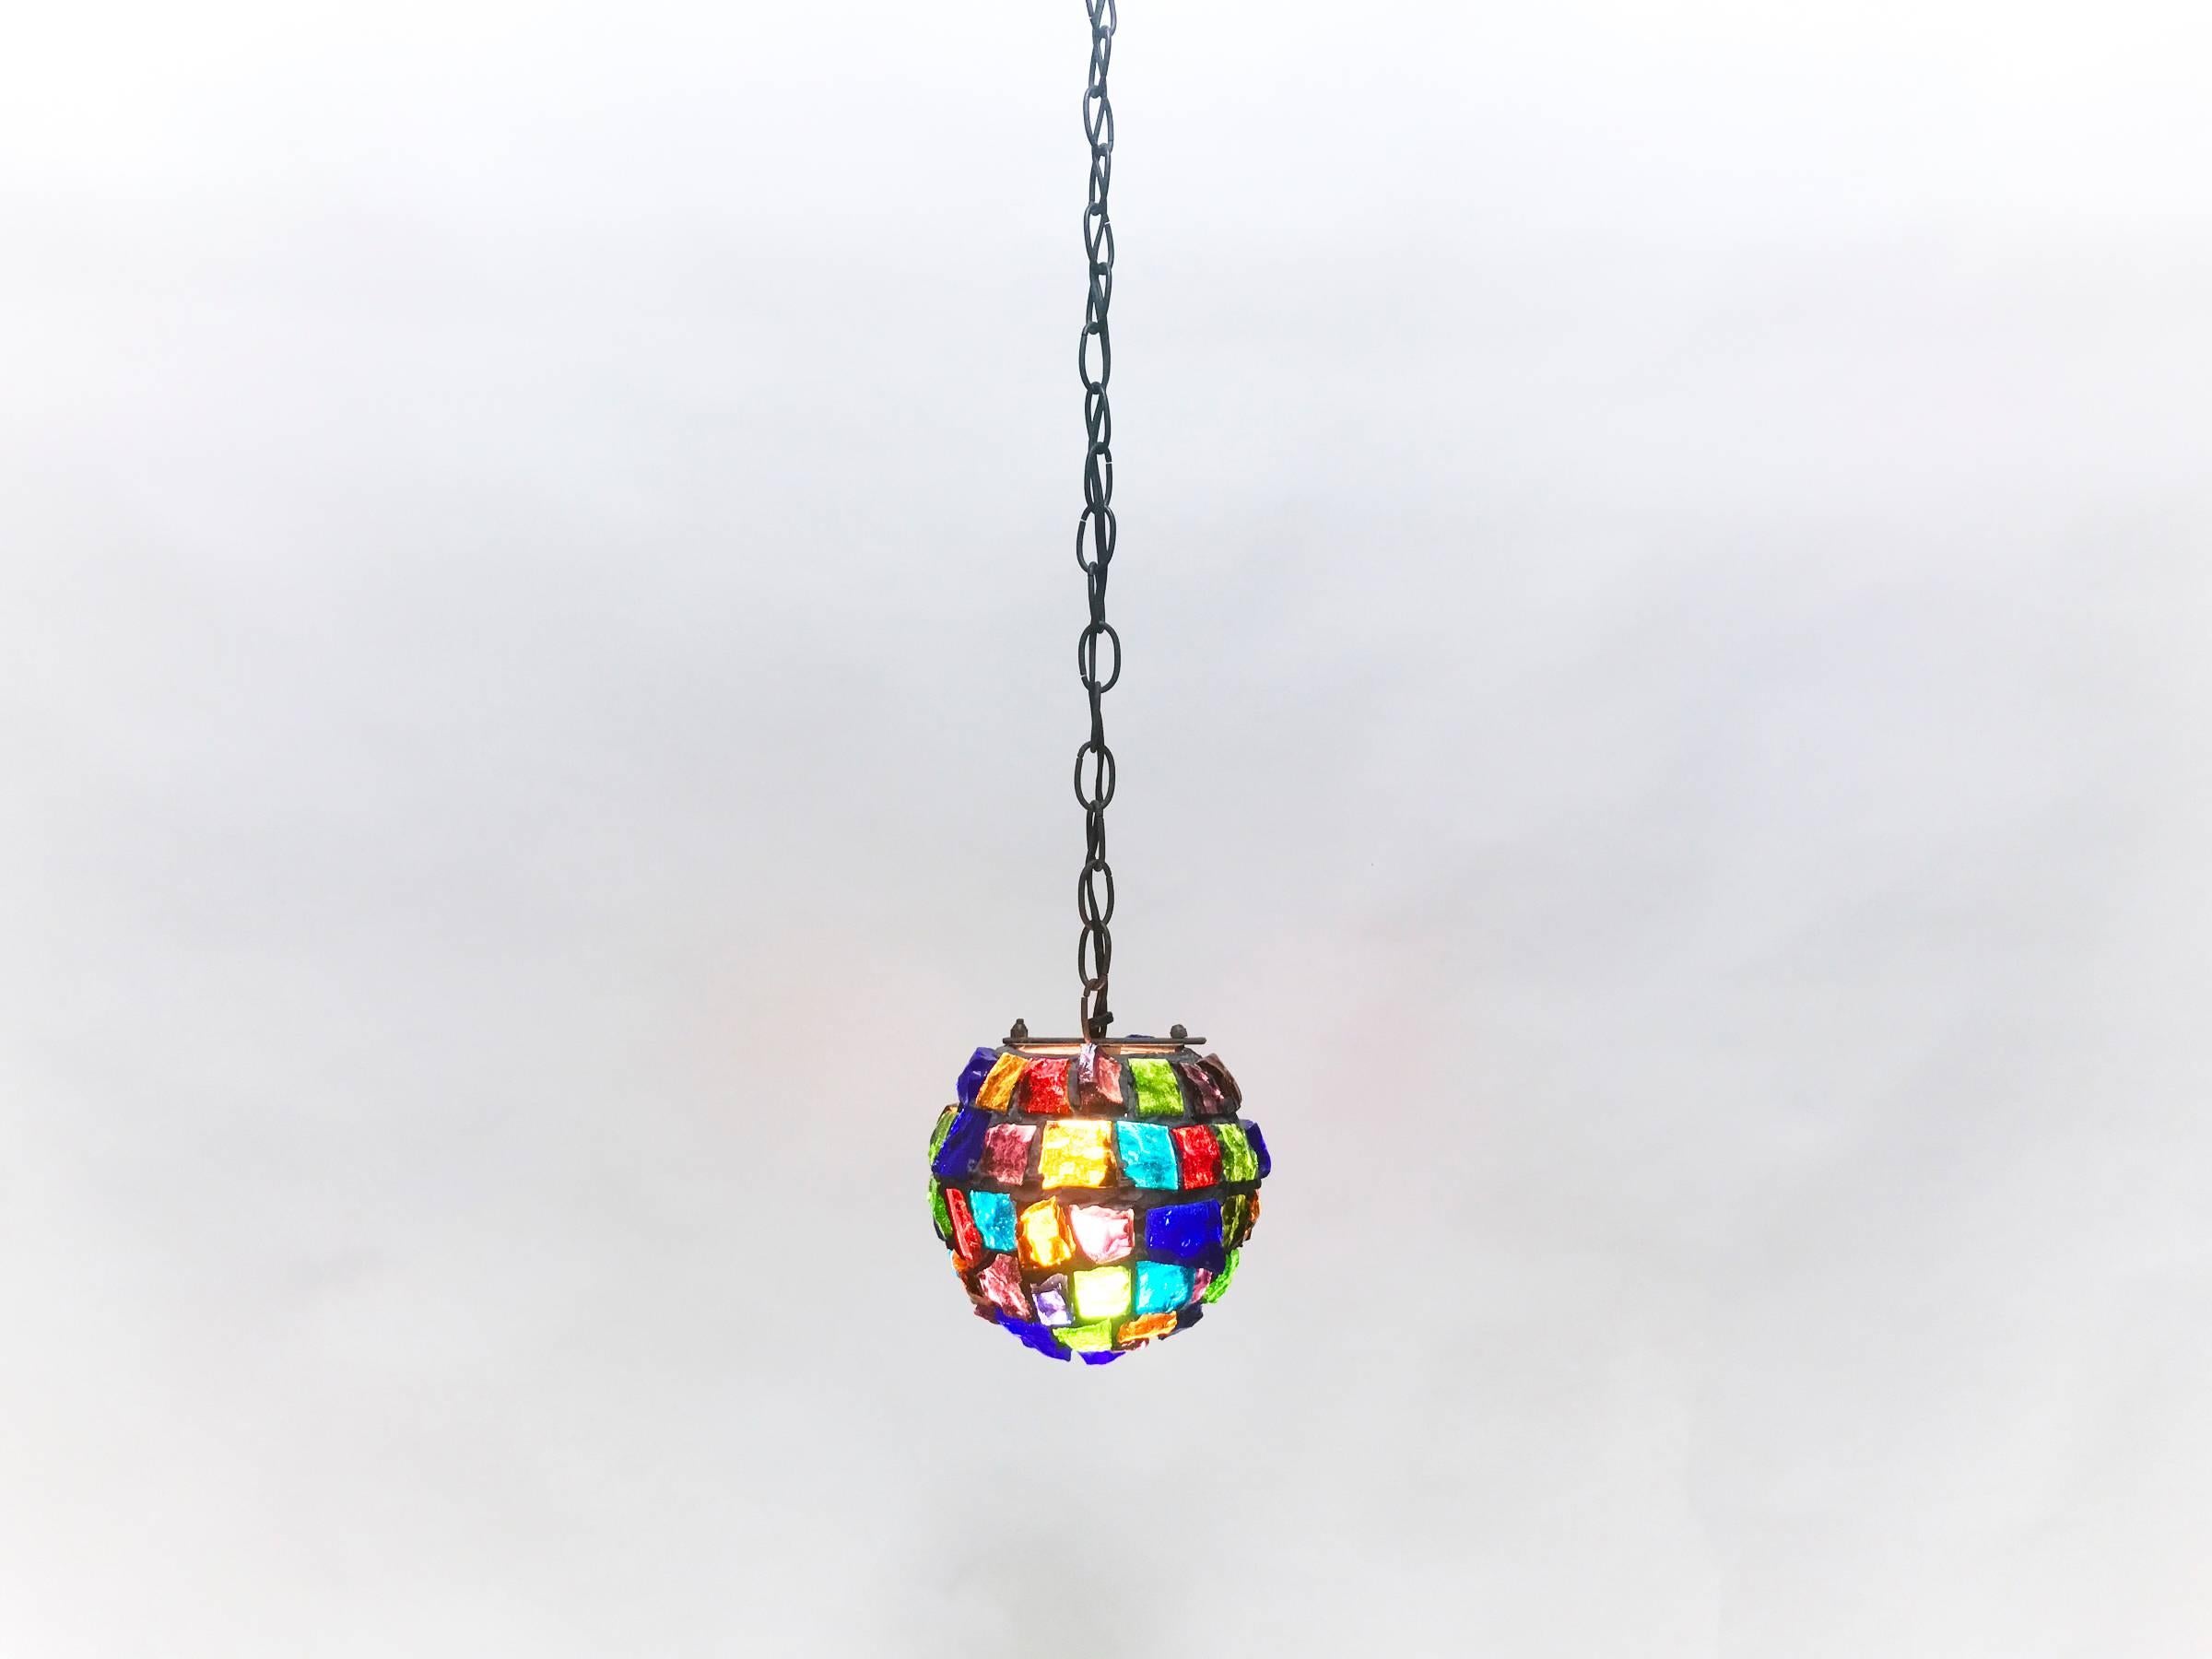 Beautiful Brutalist spherical pendant lamp with iron framework and rough multi-color glass. Diminutive in size and scale at 8 in. diameter. 11 foot chain and cord.